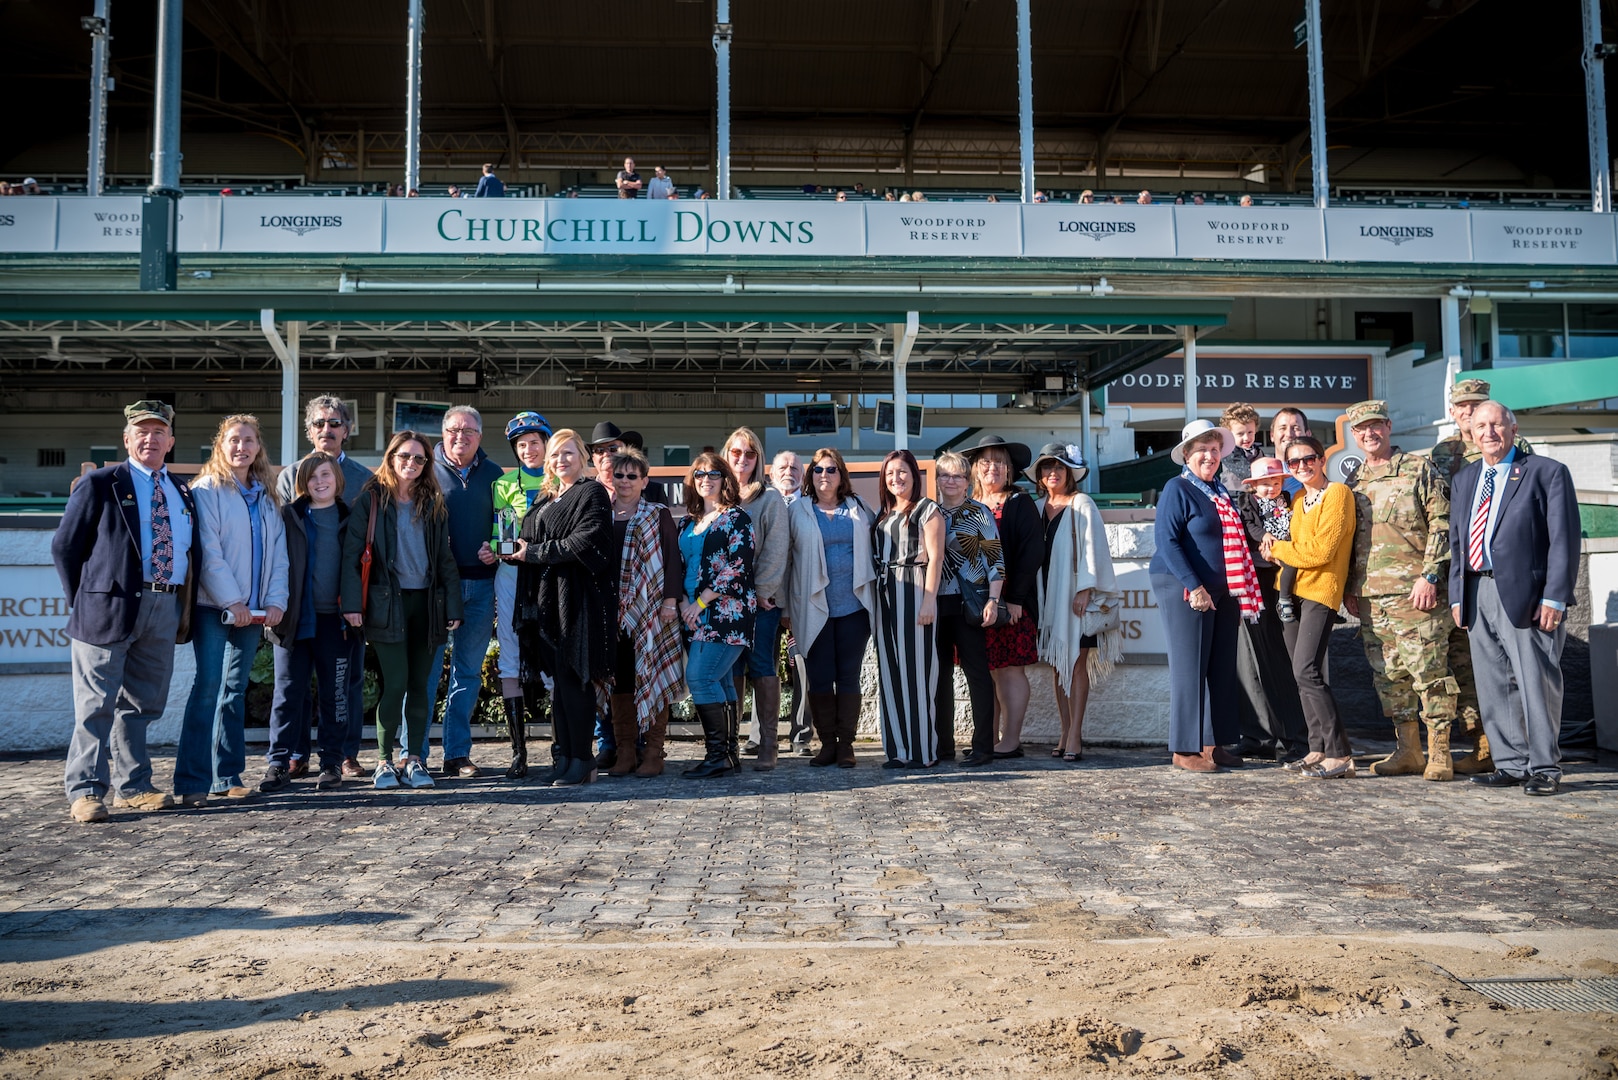 Gold Star family members are joined by Air Force Gen. Joseph Lengyel, chief of the National Guard Bureau, in the winner's circle to present the trophy for a race named in honor of Gold Star Families at the 10th annual Survivors Day at the Races at Churchill Downs in Louisville, Ky., Nov. 3, 2019. The event welcomed nearly 1,000 family members of fallen service members for a day of fellowship and healing.